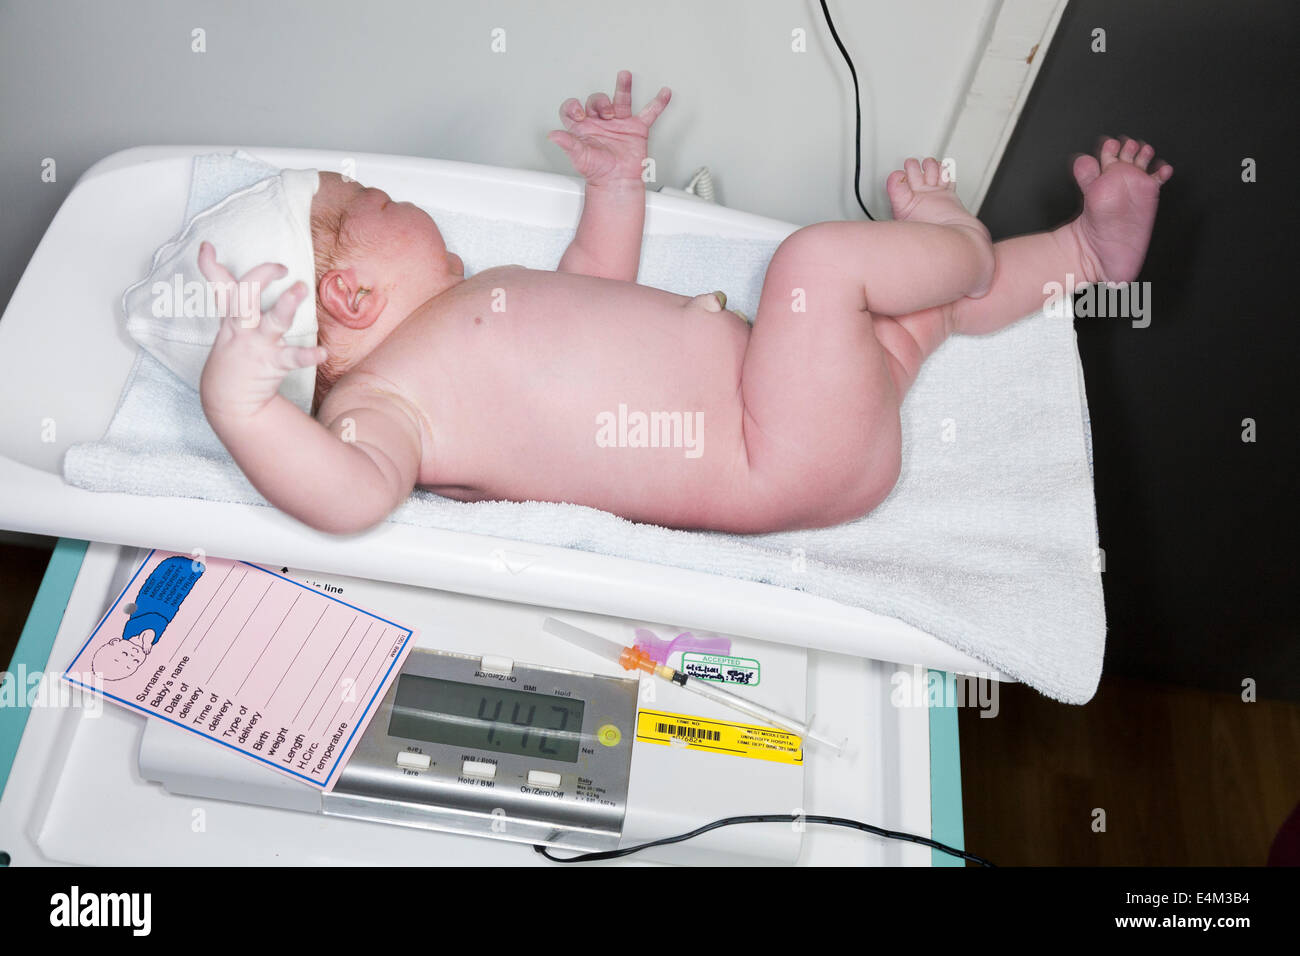 Weighing a newborn / new born baby with weighing scales / scale soon after childbirth / giving birth in an NHS hospital. Stock Photo